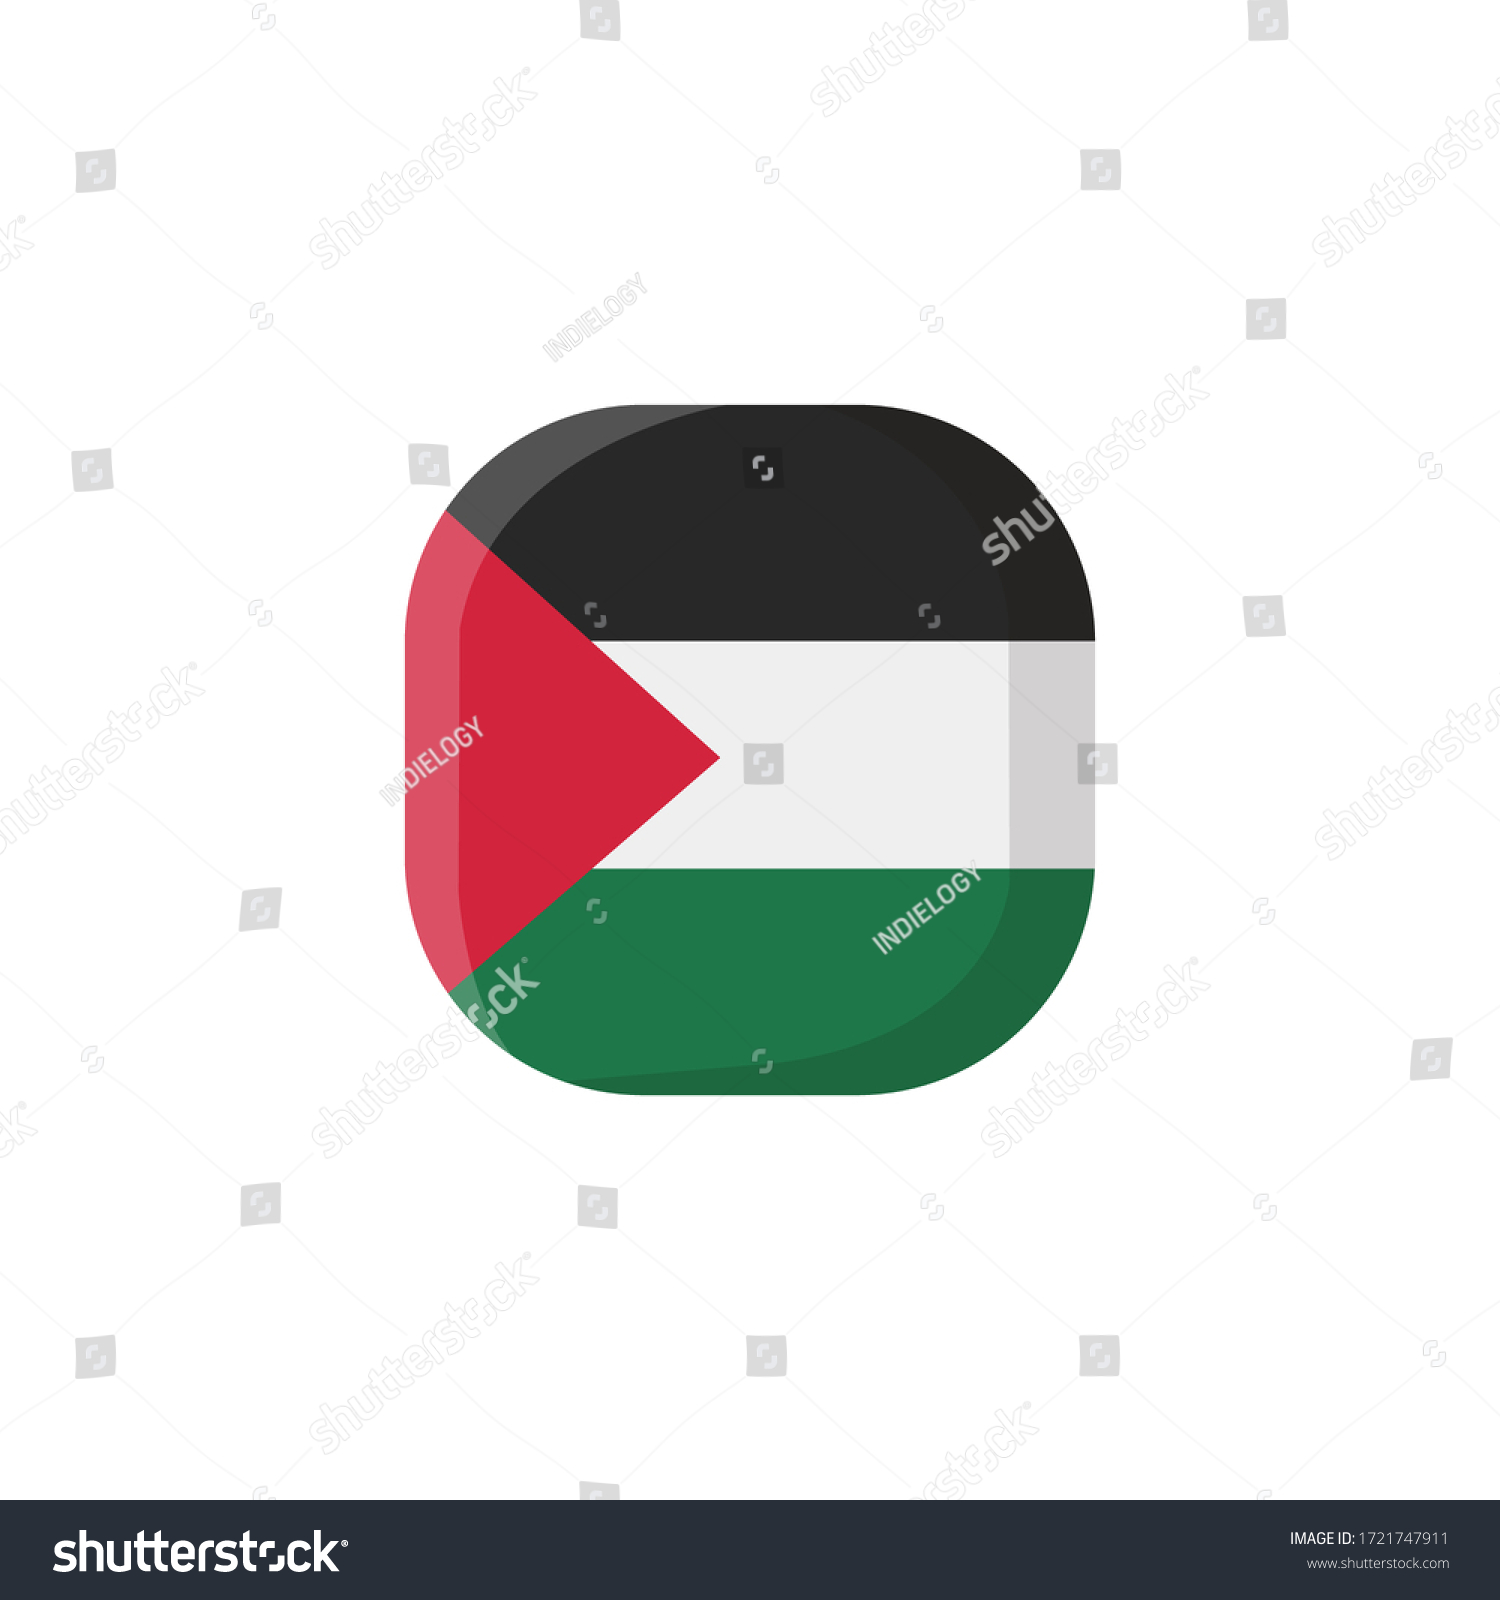 Palestine Flag Icon National Flag Square Stock Vector Royalty Free 1721747911